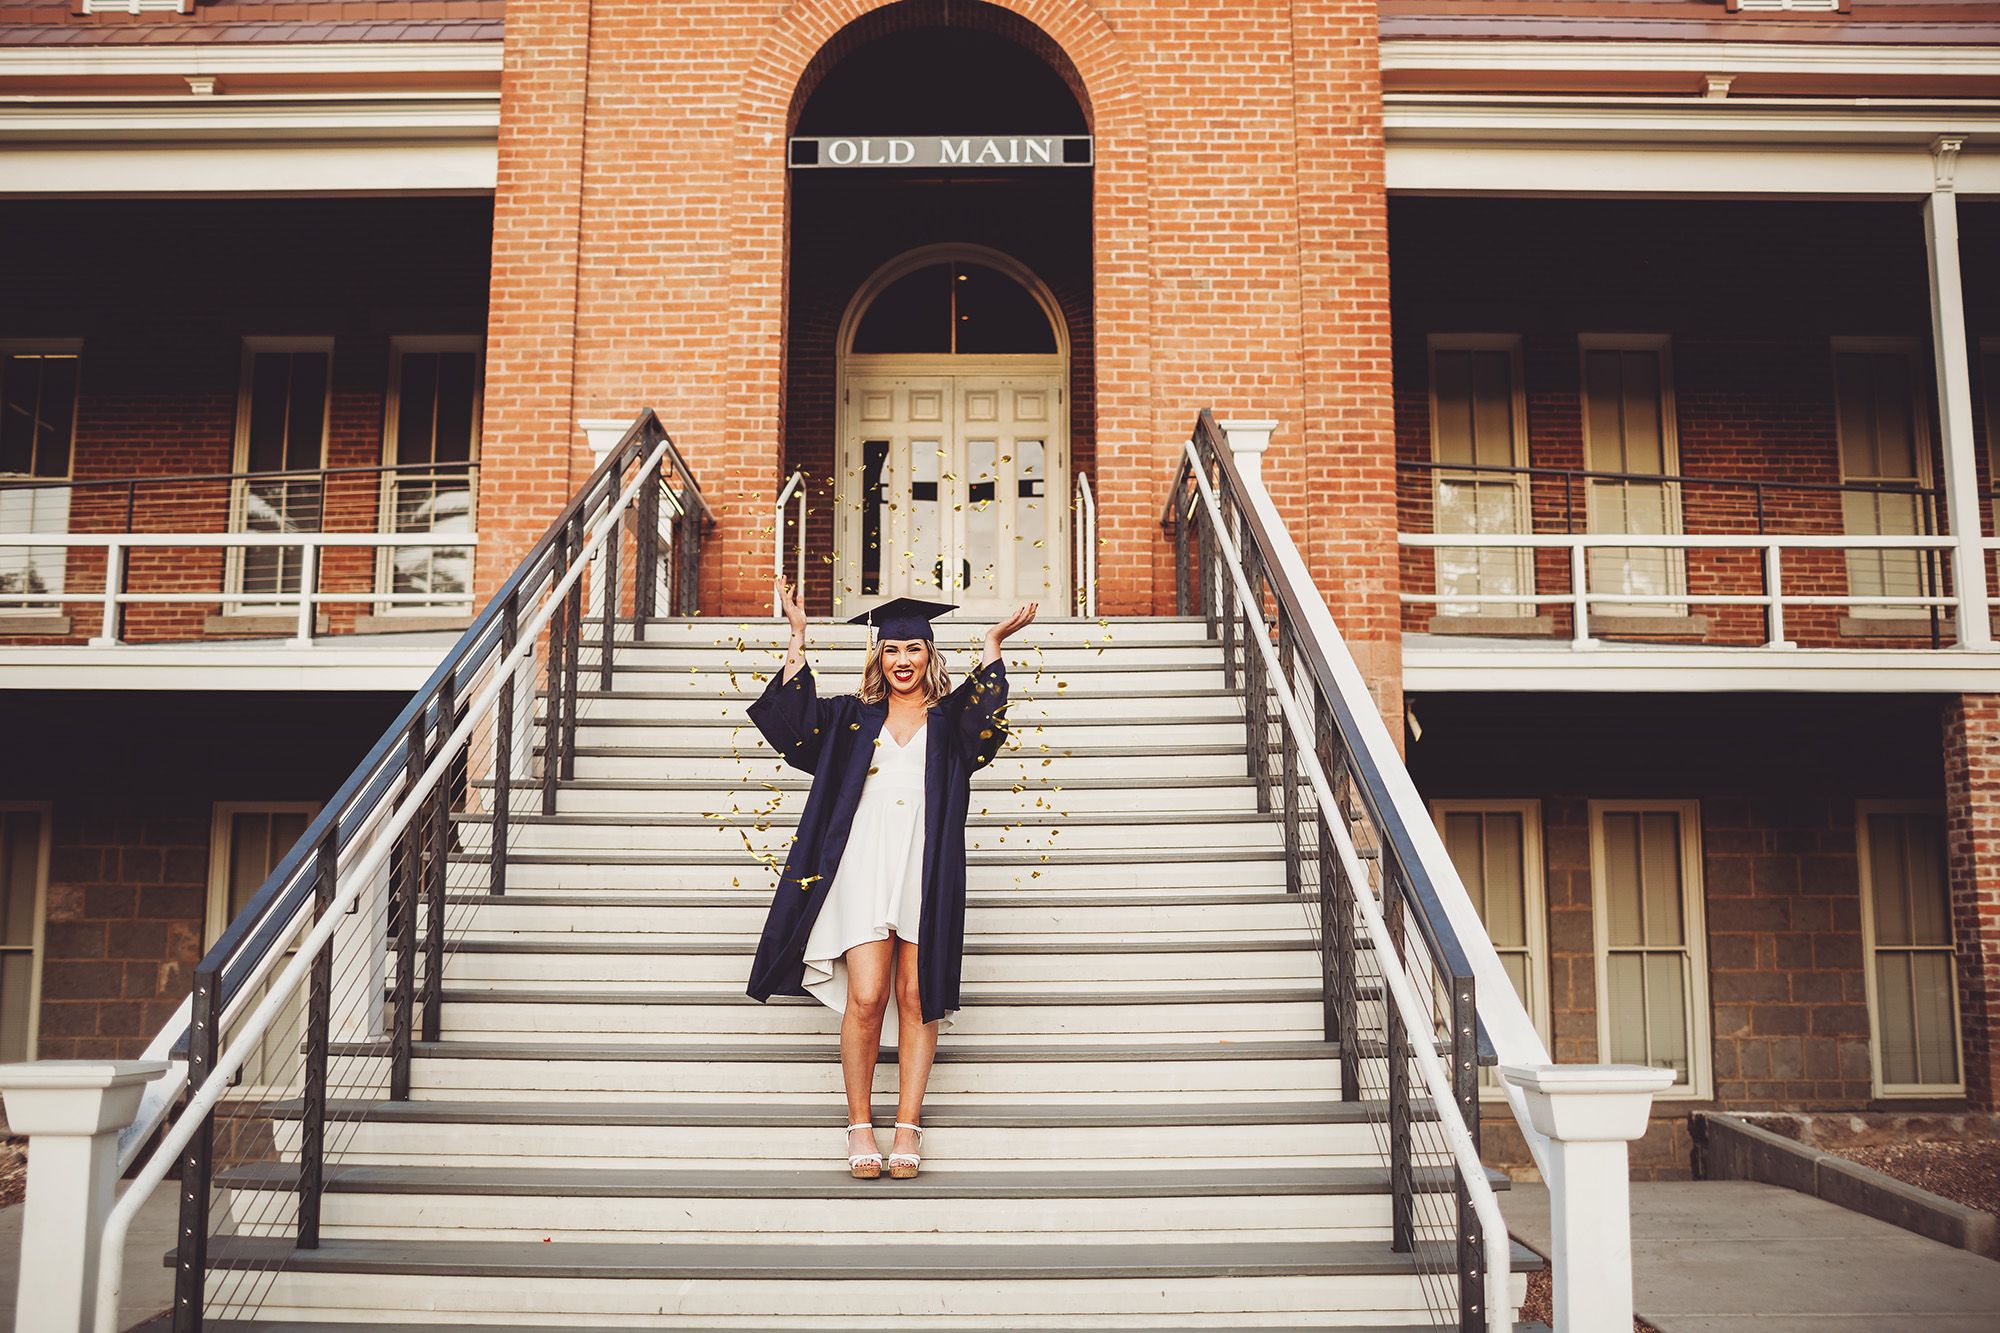 Shelby tosses confetti into the air on the steps of the Old Main building at the University of Arizona during her senior session with Belle Vie Photography